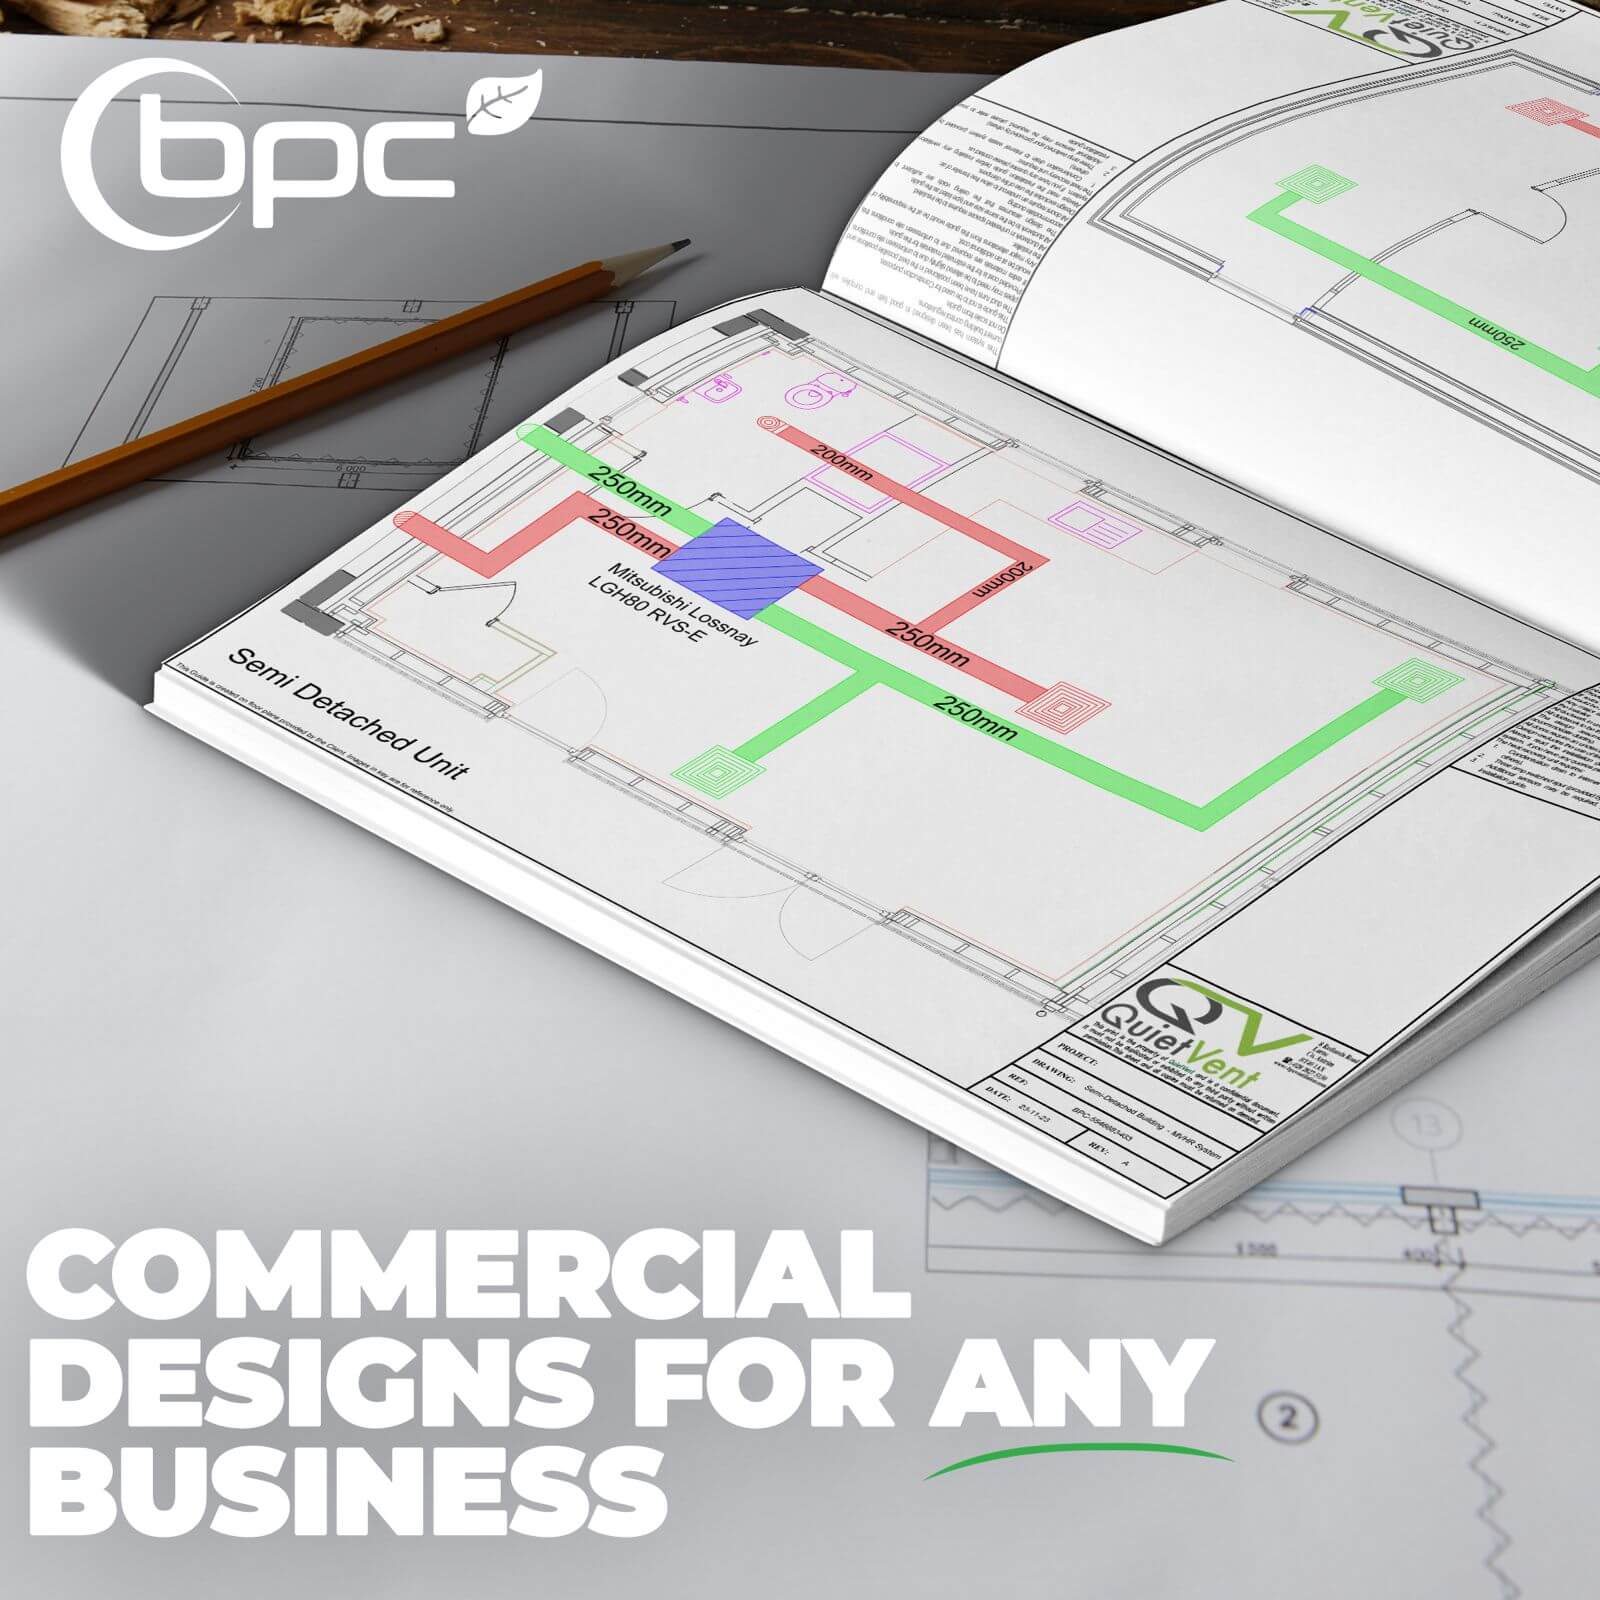 BPC Ventilation's Impactful Commercial Projects